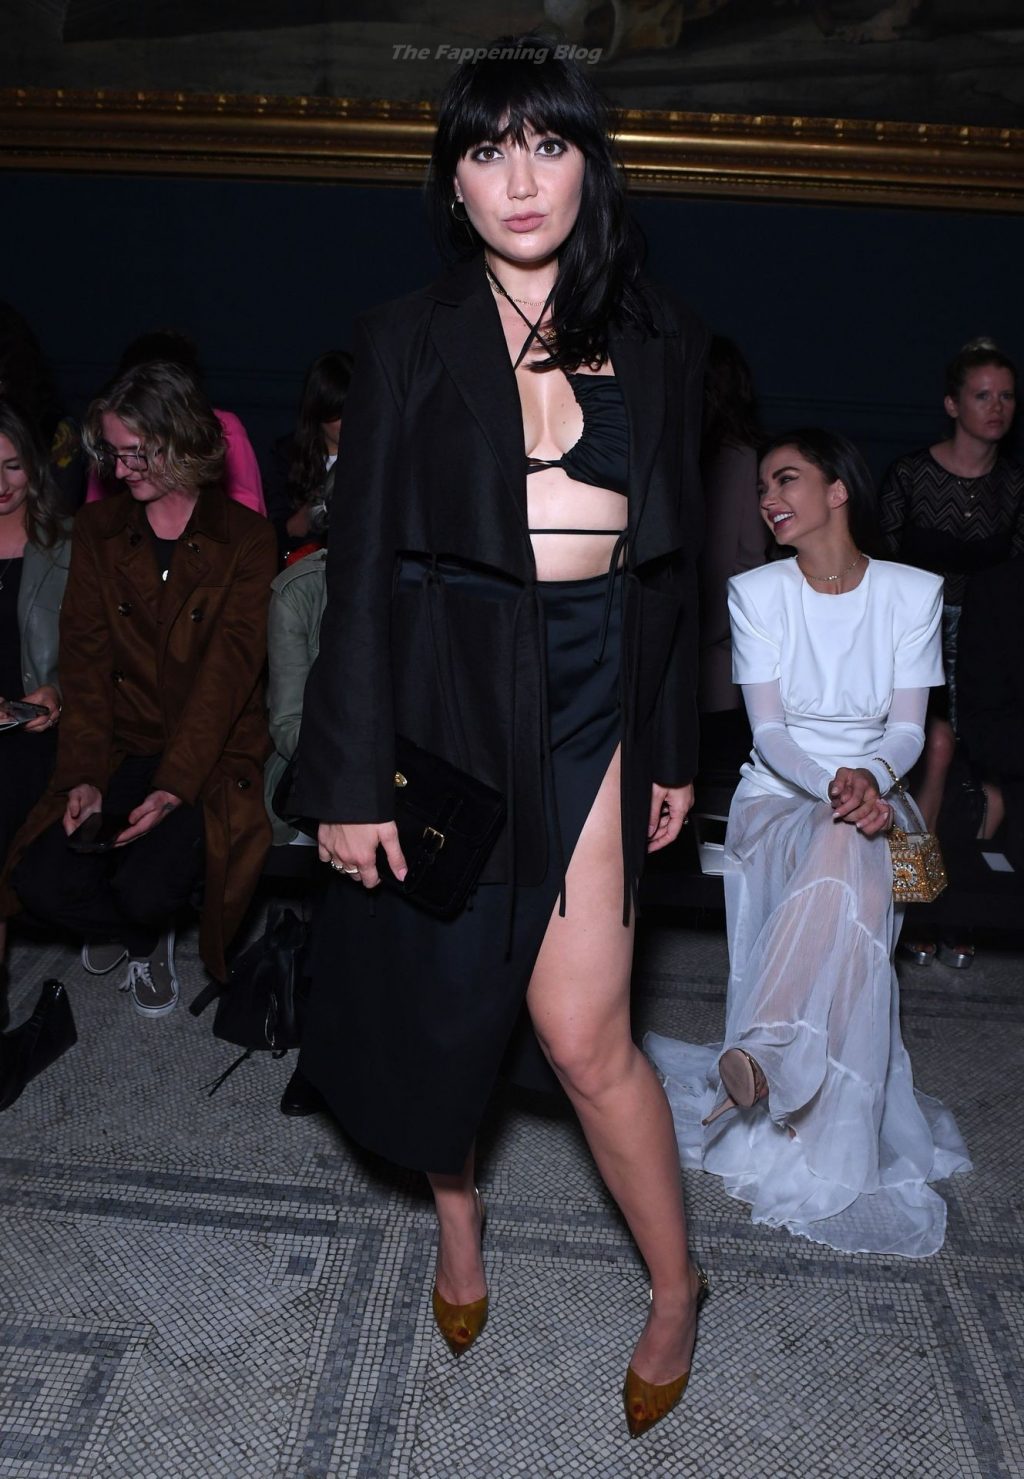 Daisy Lowe Flaunts Her Sexy Legs As She Attends Richard Malone x Mulberry Show in London (71 Photos)